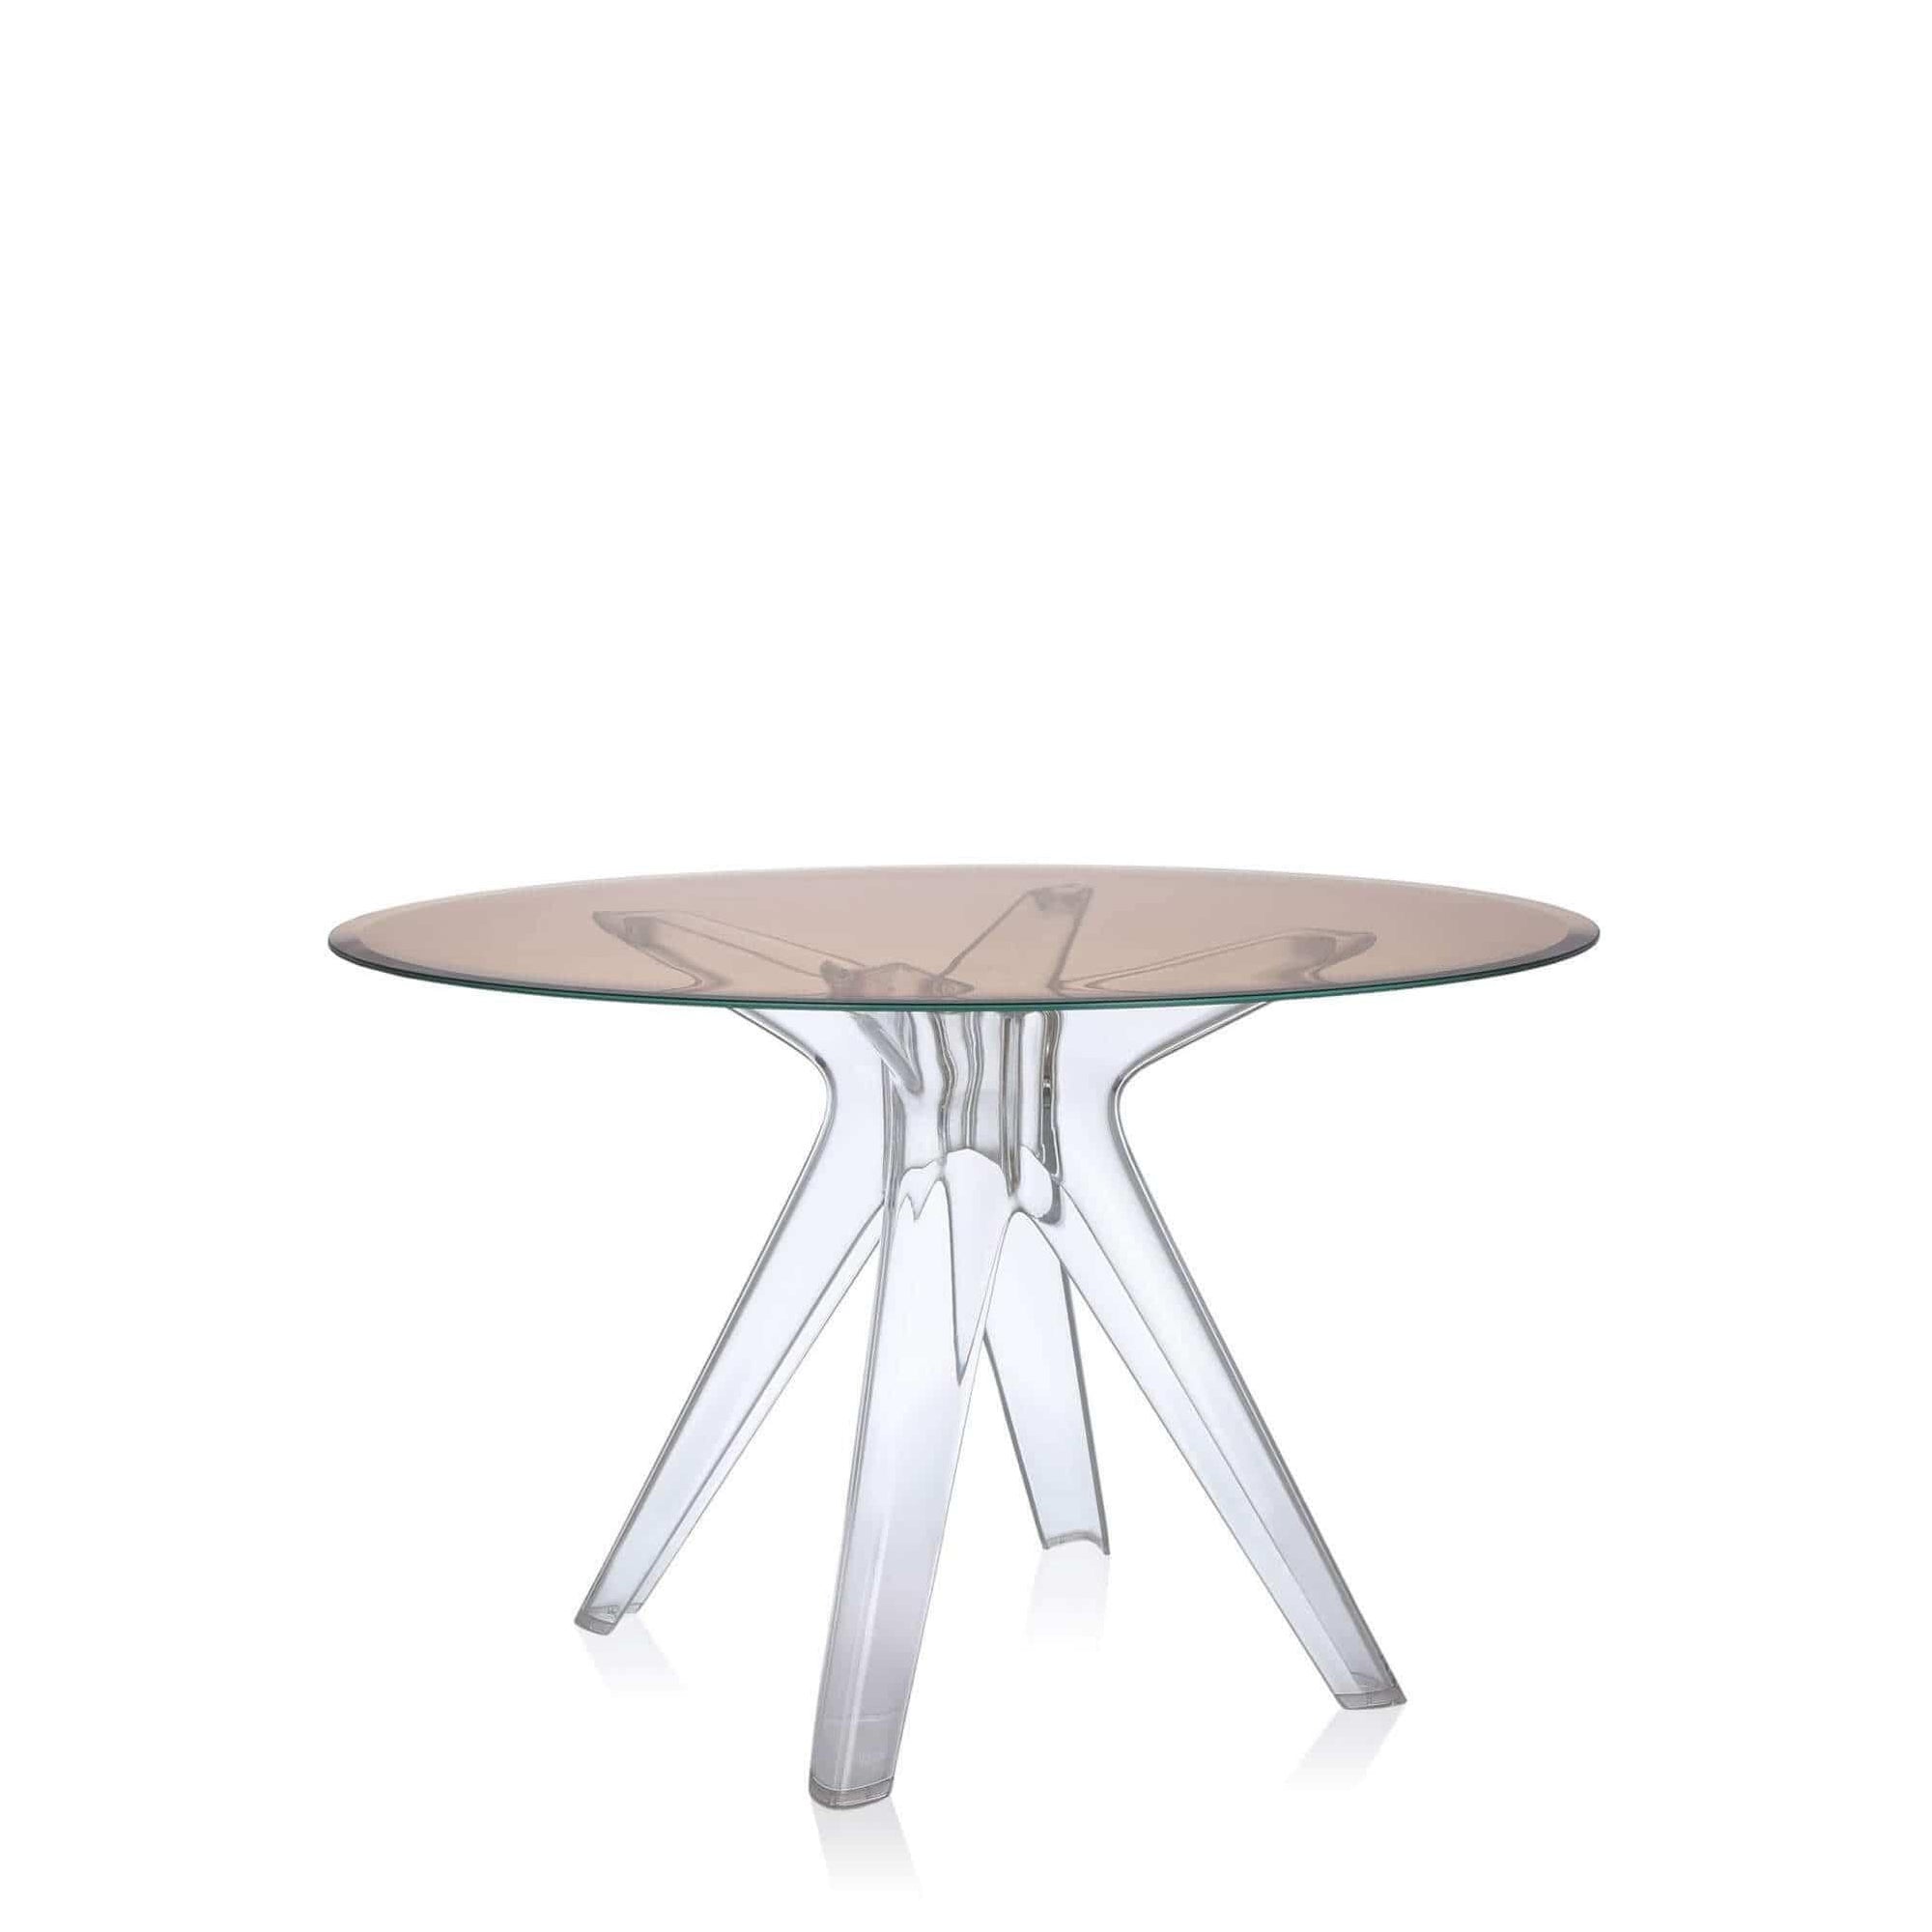 Sir Gio Round Table - Curated - Furniture - Kartell